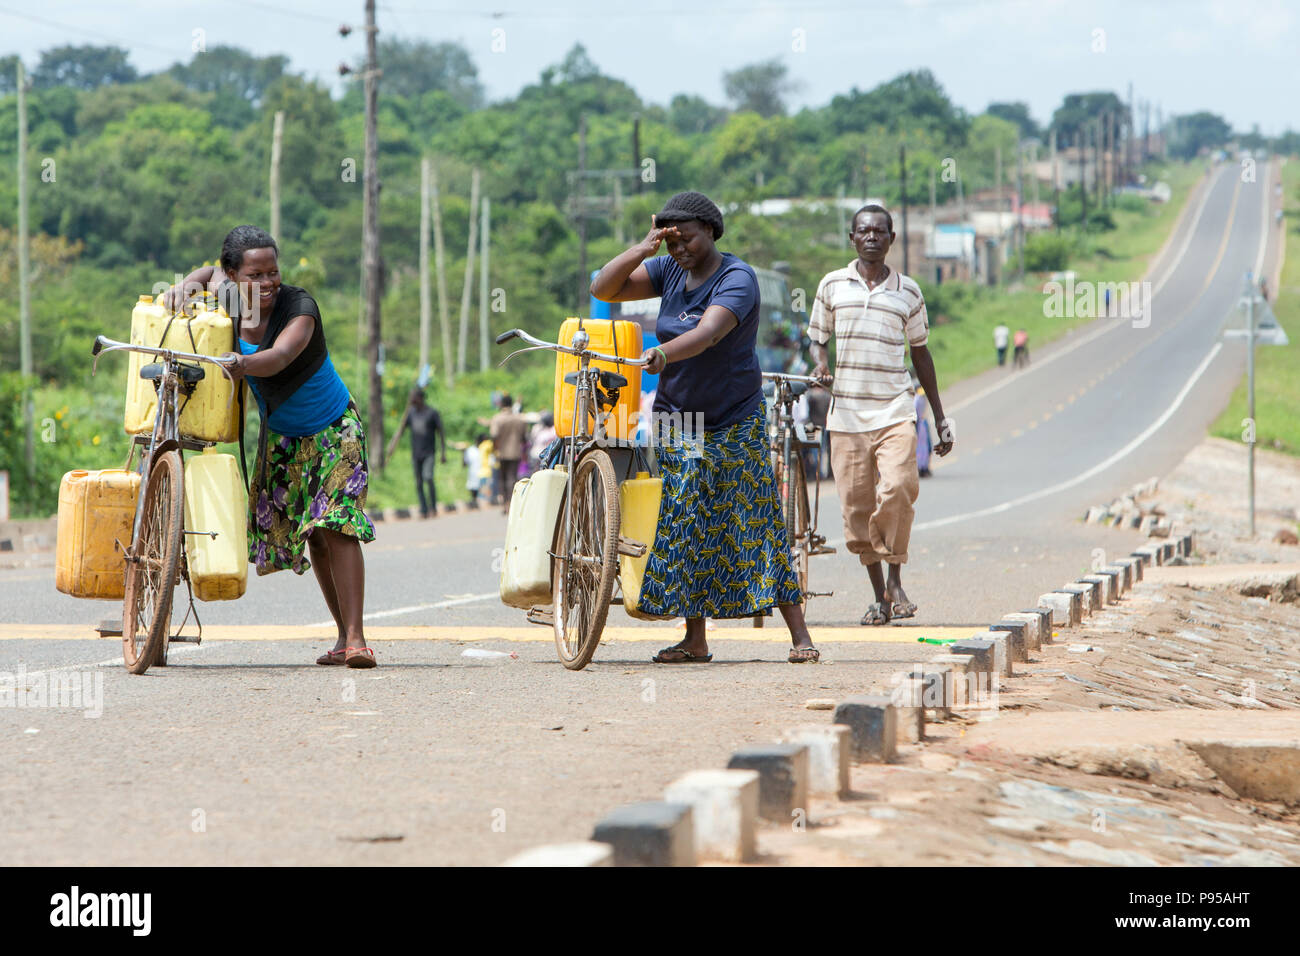 Kamdini, Uganda - city view. Two women push up a hill, carrying bicycles laden with plastic canisters. Stock Photo